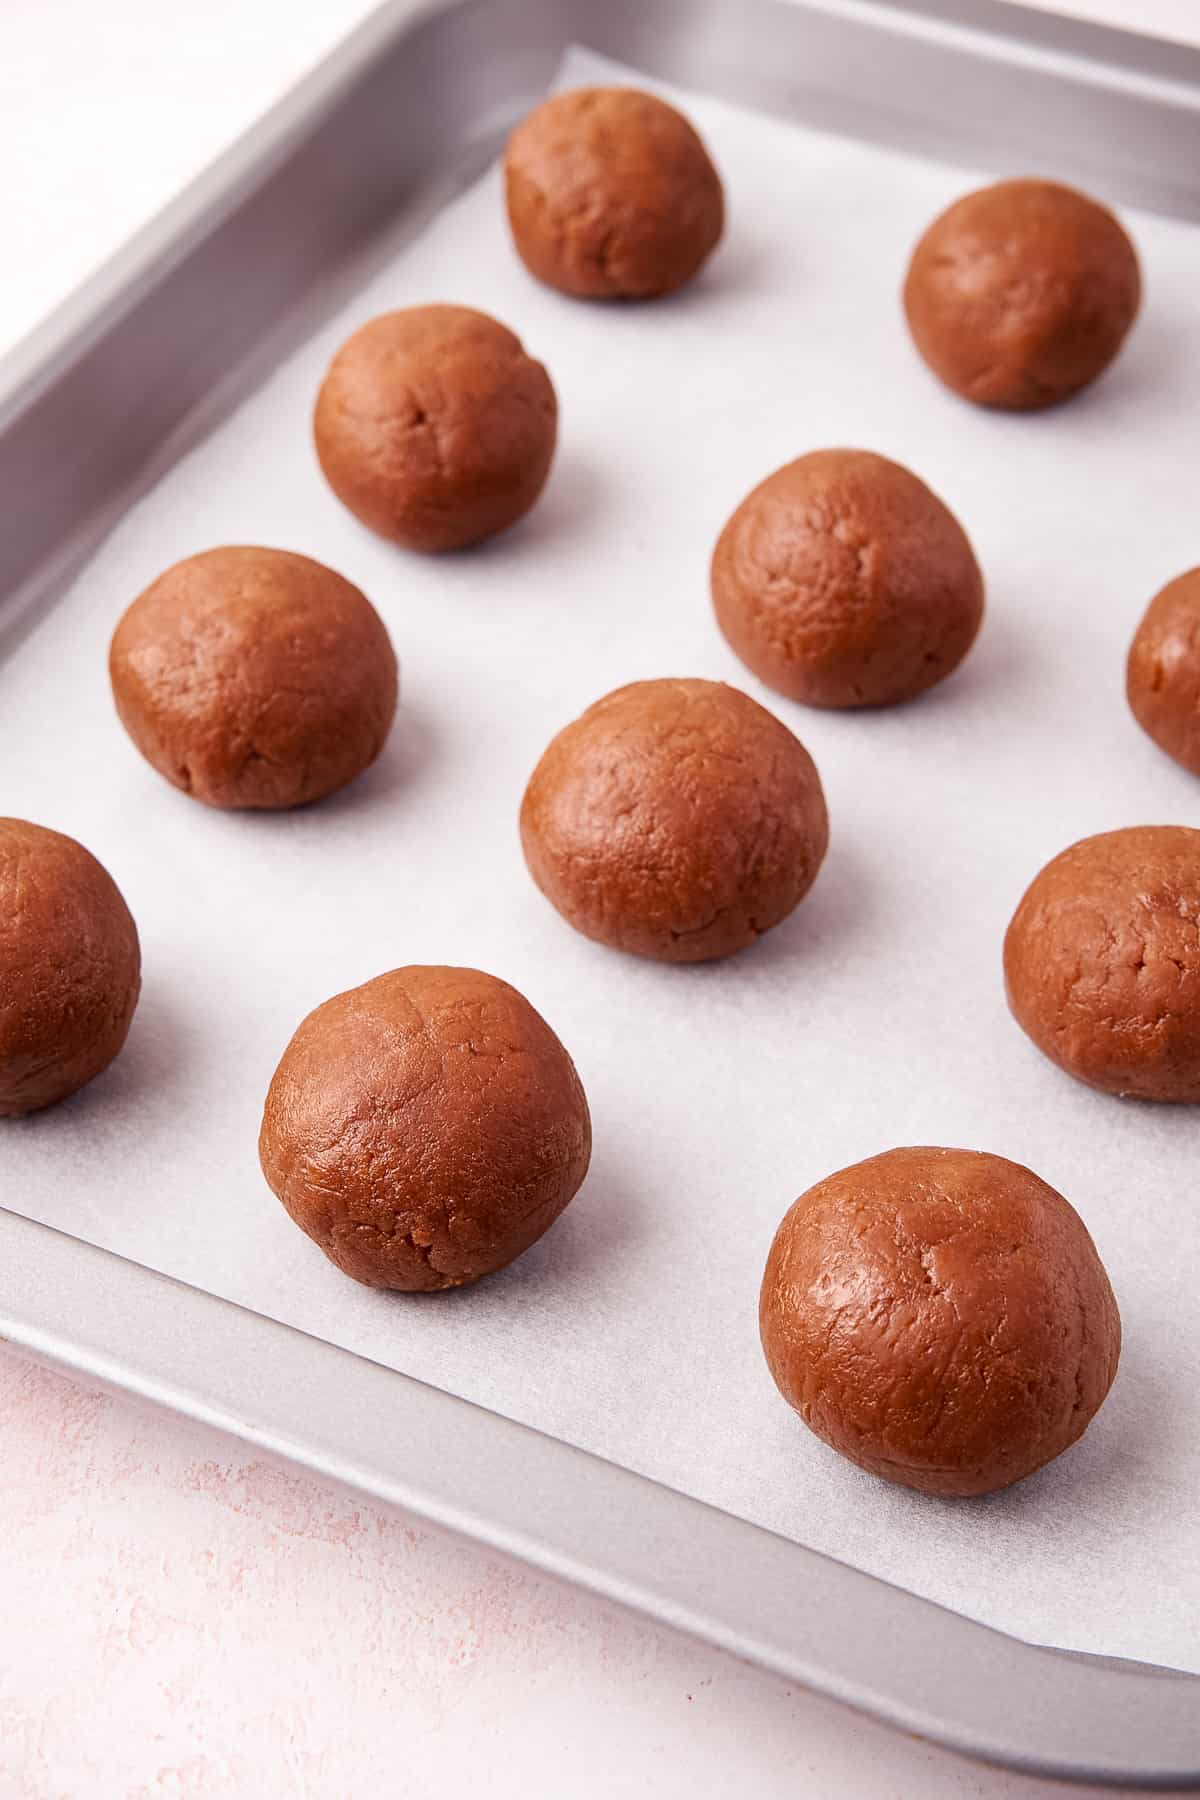 Rolled balls of biscoff cookie truffle mixture on lined baking sheet.